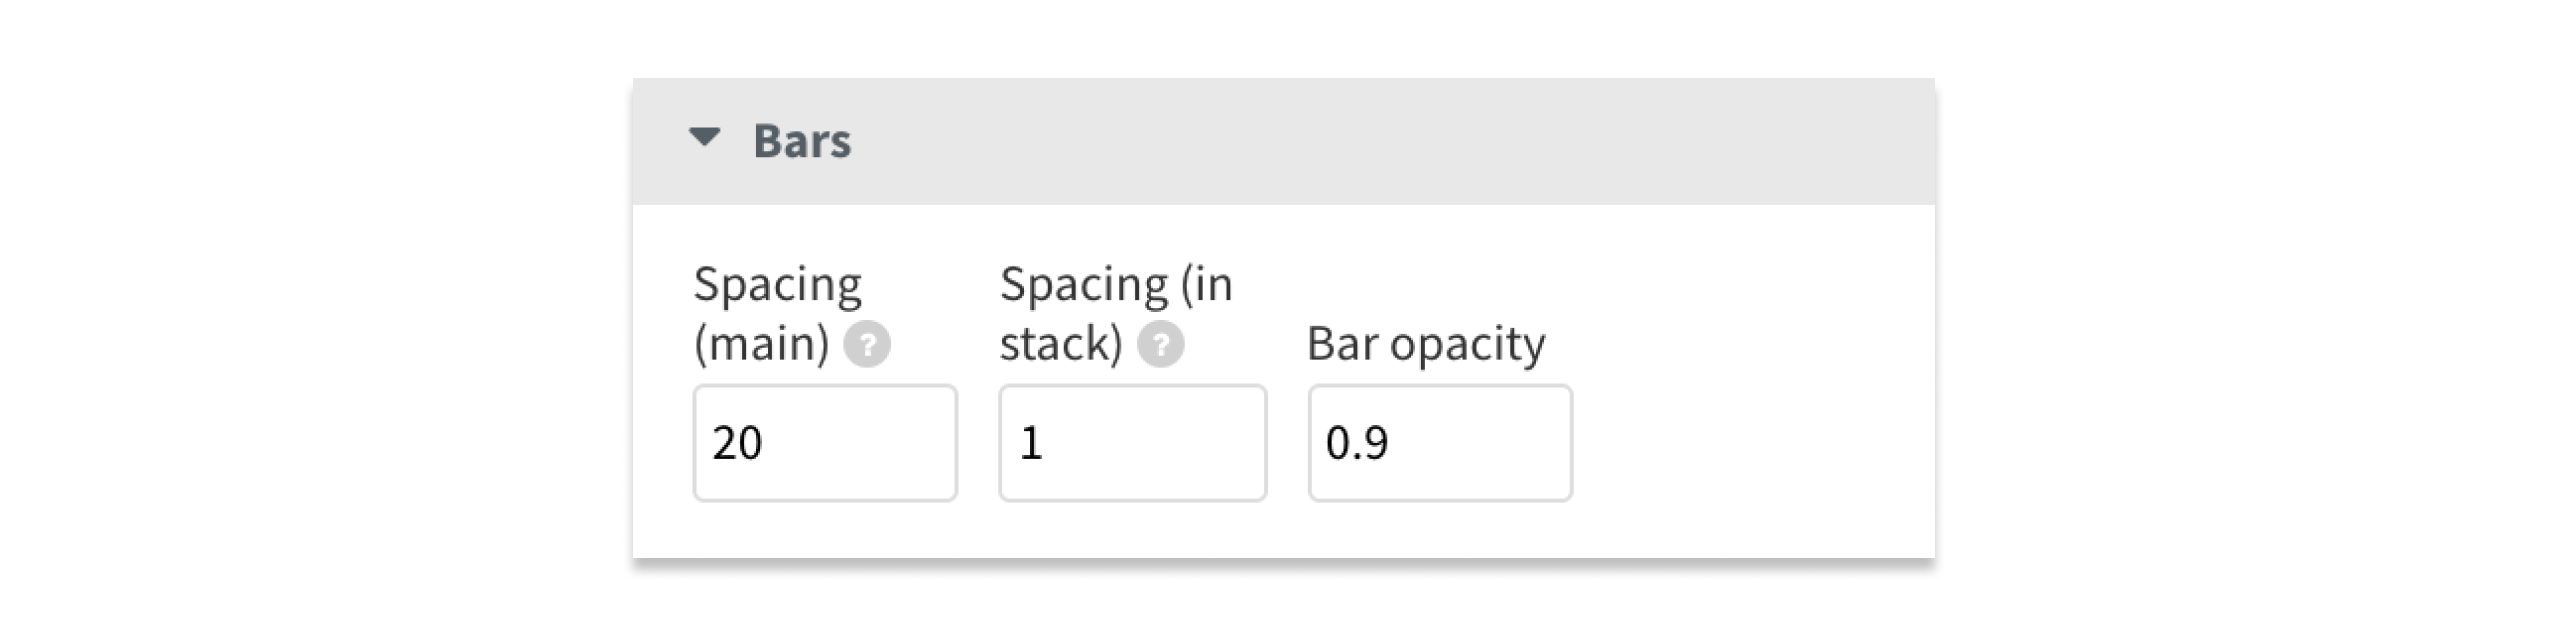 Bar spacing settings in our Line, bar, pie template